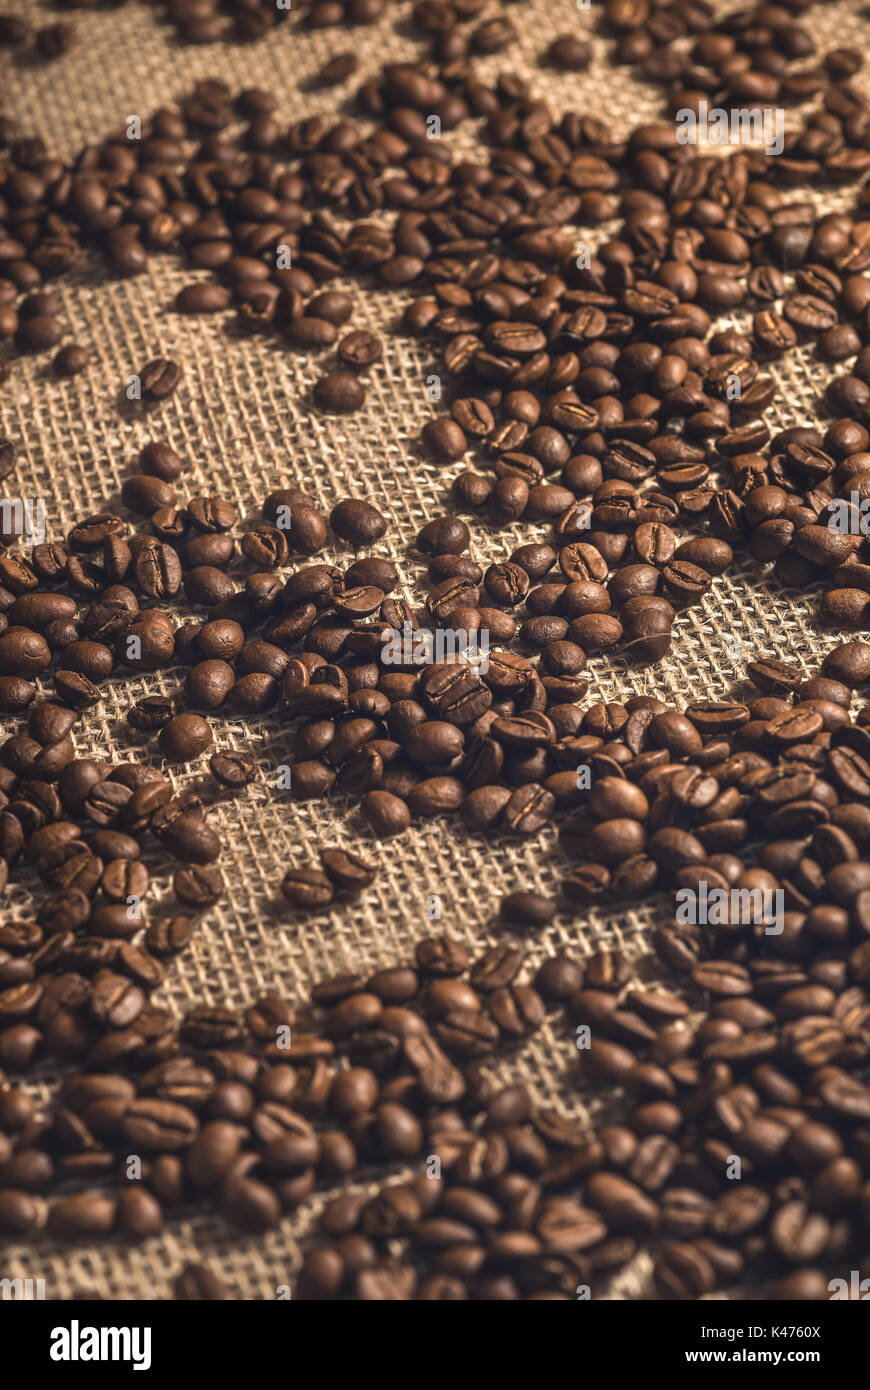 Roasted coffee beans on the fabric of the coffee bag. Stock Photo